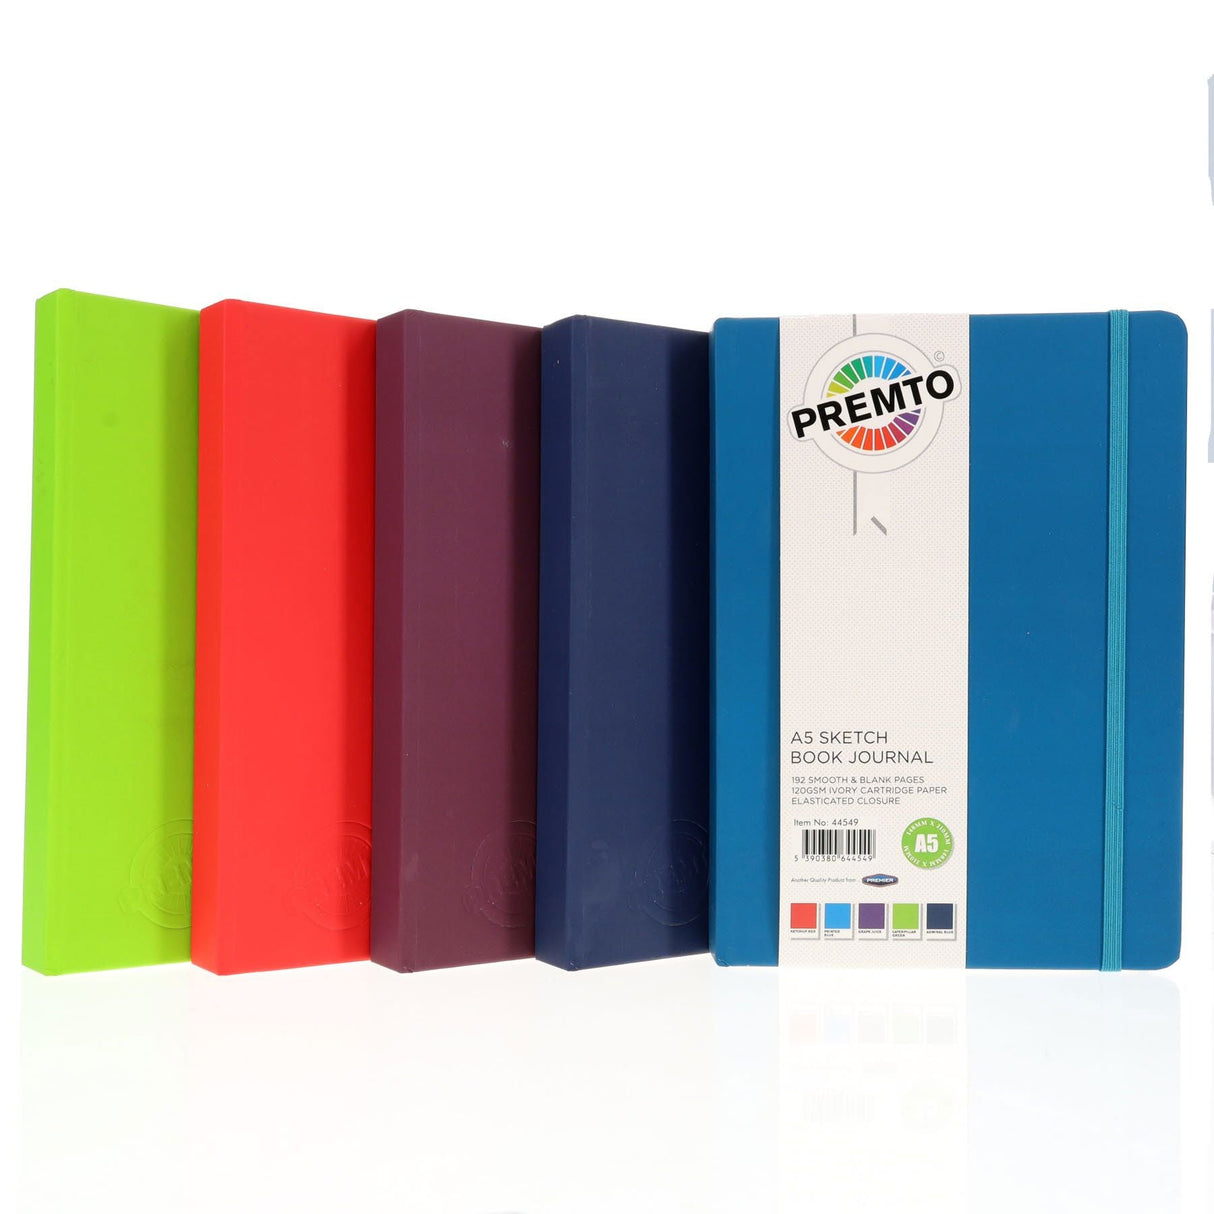 Premto A5 Journal & Sketch Book - 192 Pages - Admiral Blue | Stationery Shop UK